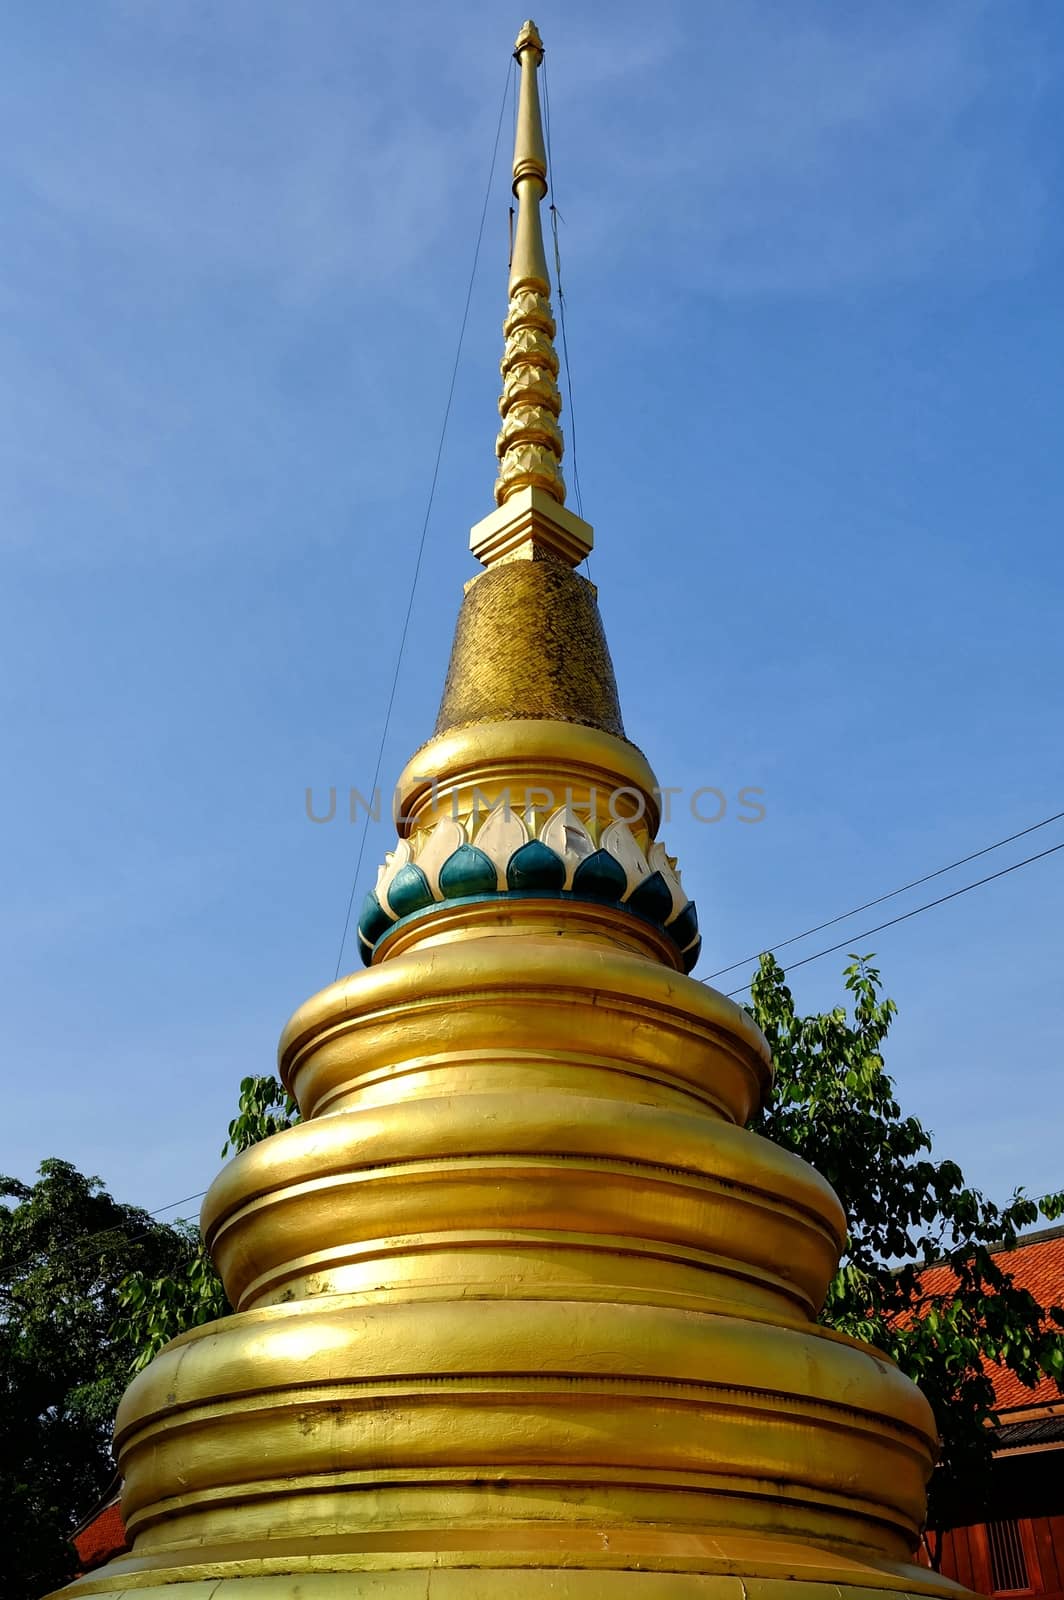 Ancient Golden Buddhist Pagoda. by mesamong